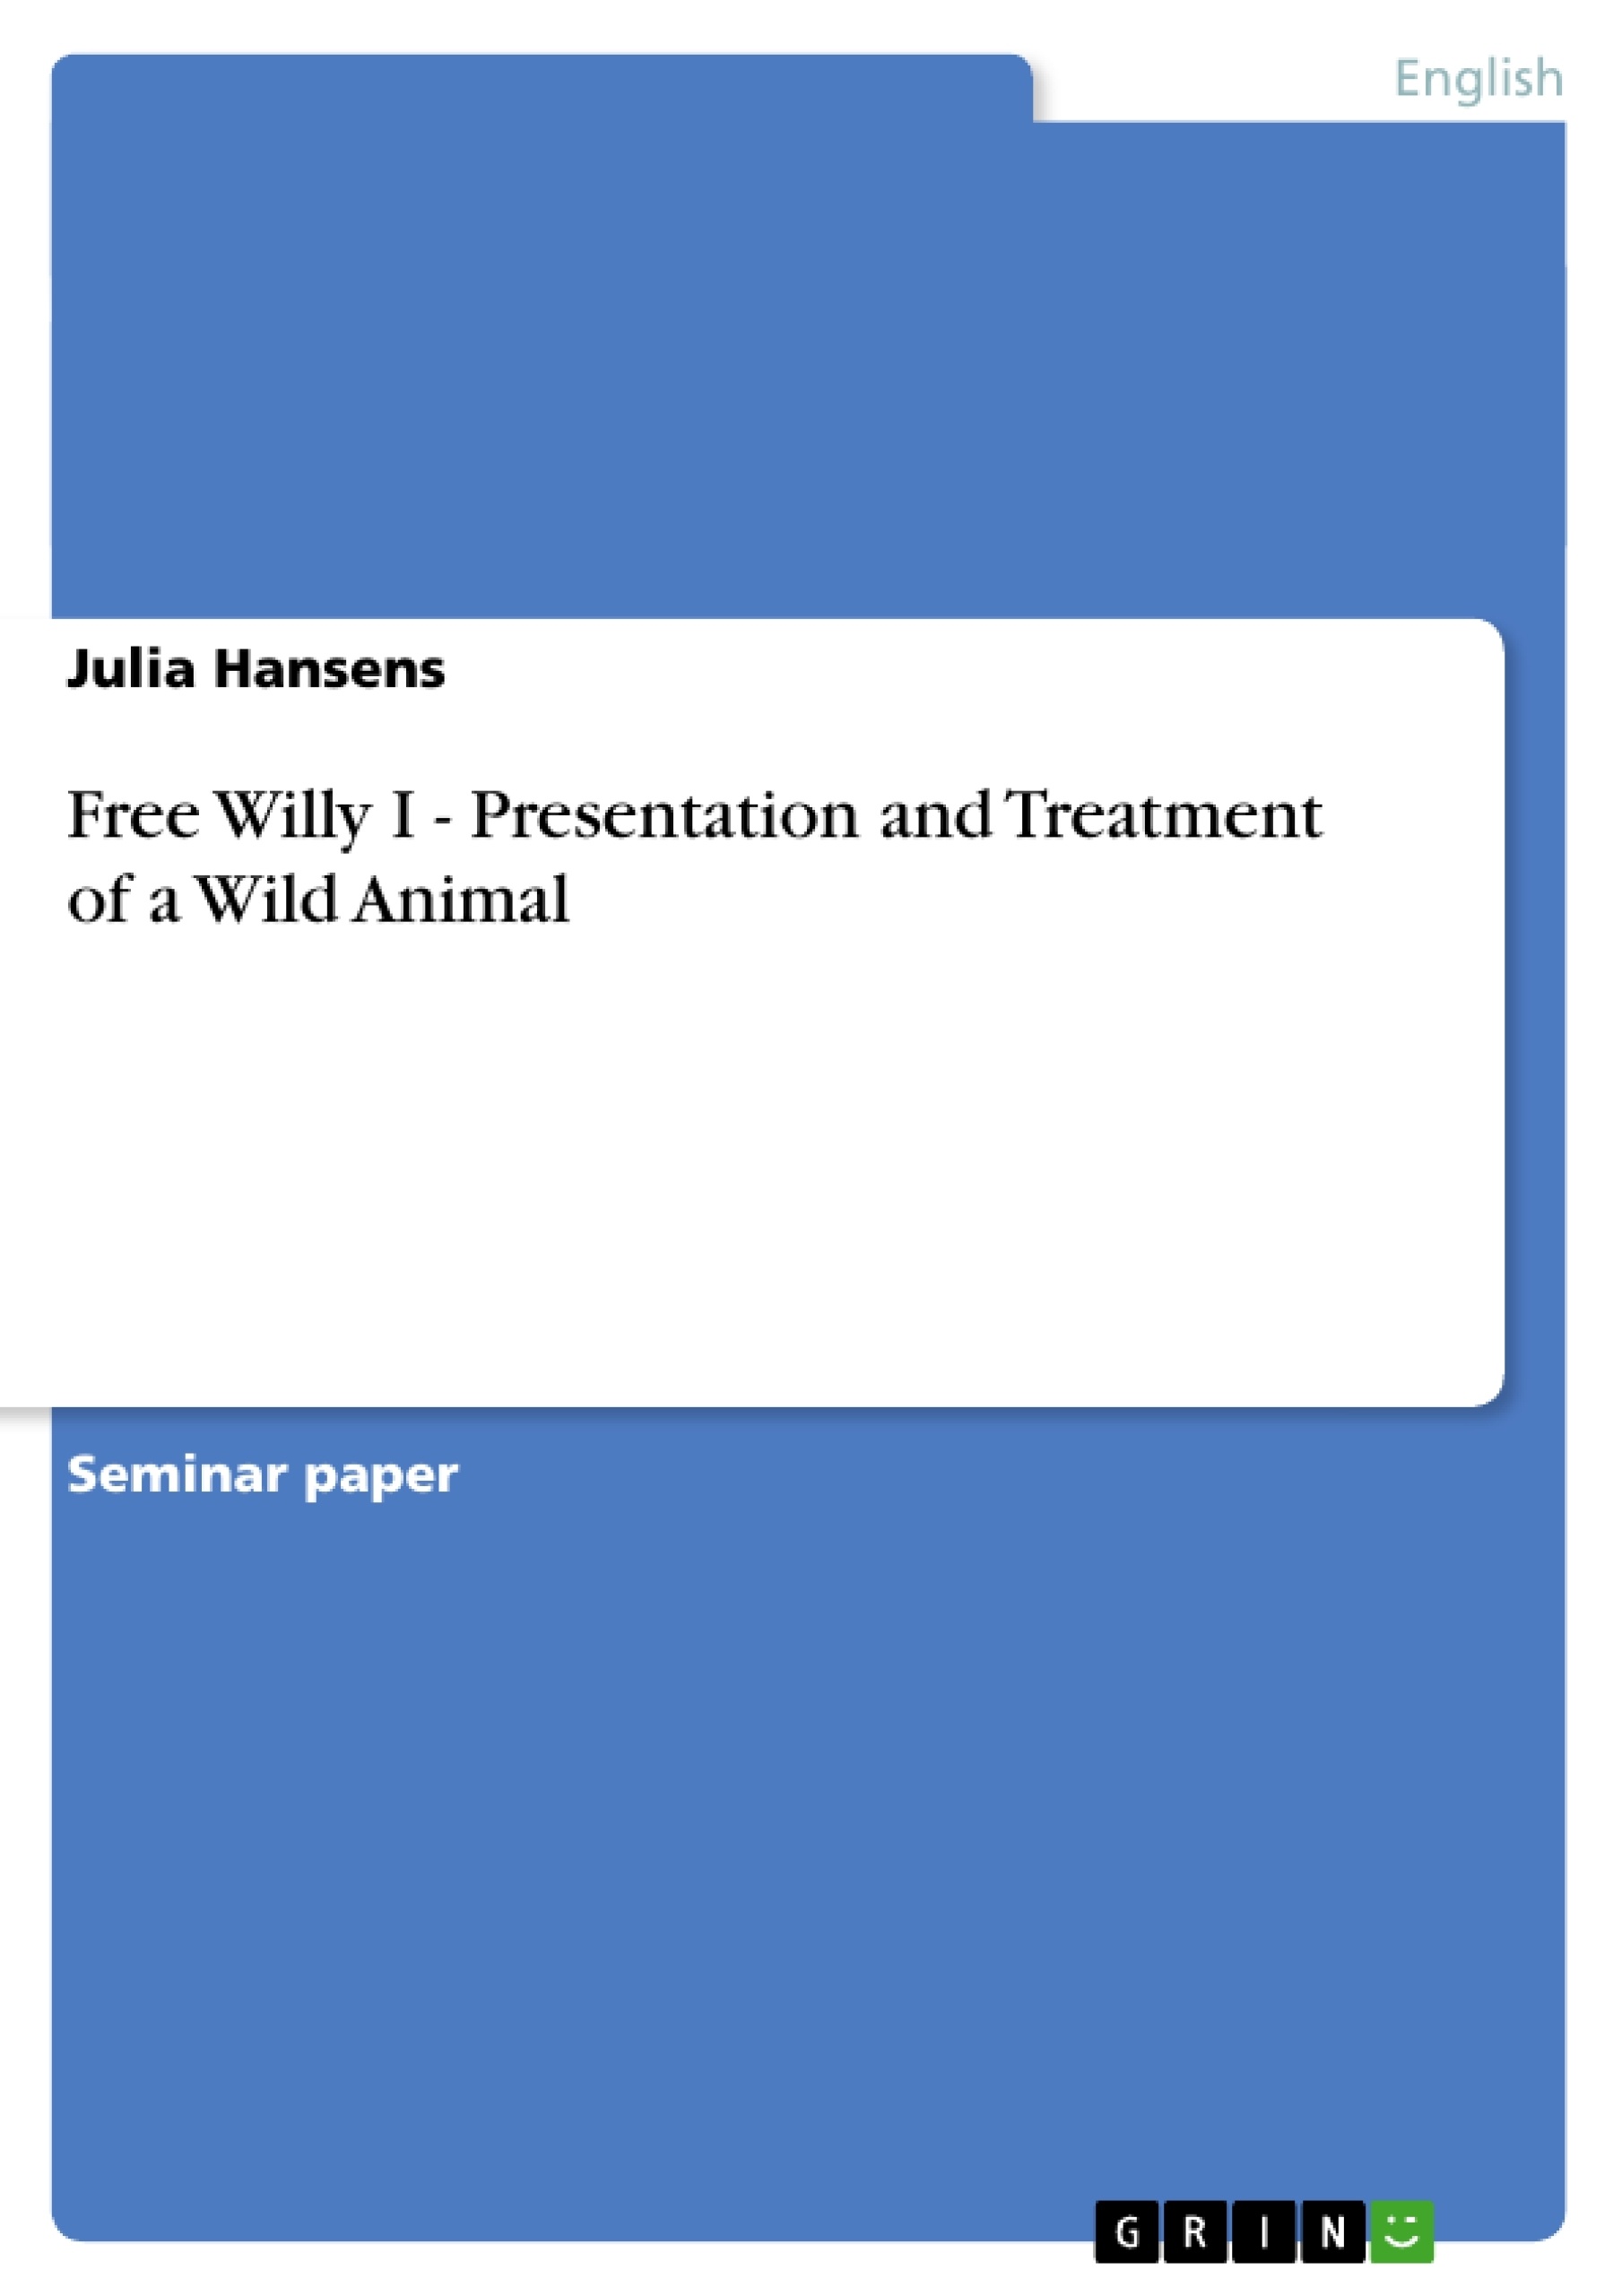 Titre: Free Willy I - Presentation and Treatment of a Wild Animal